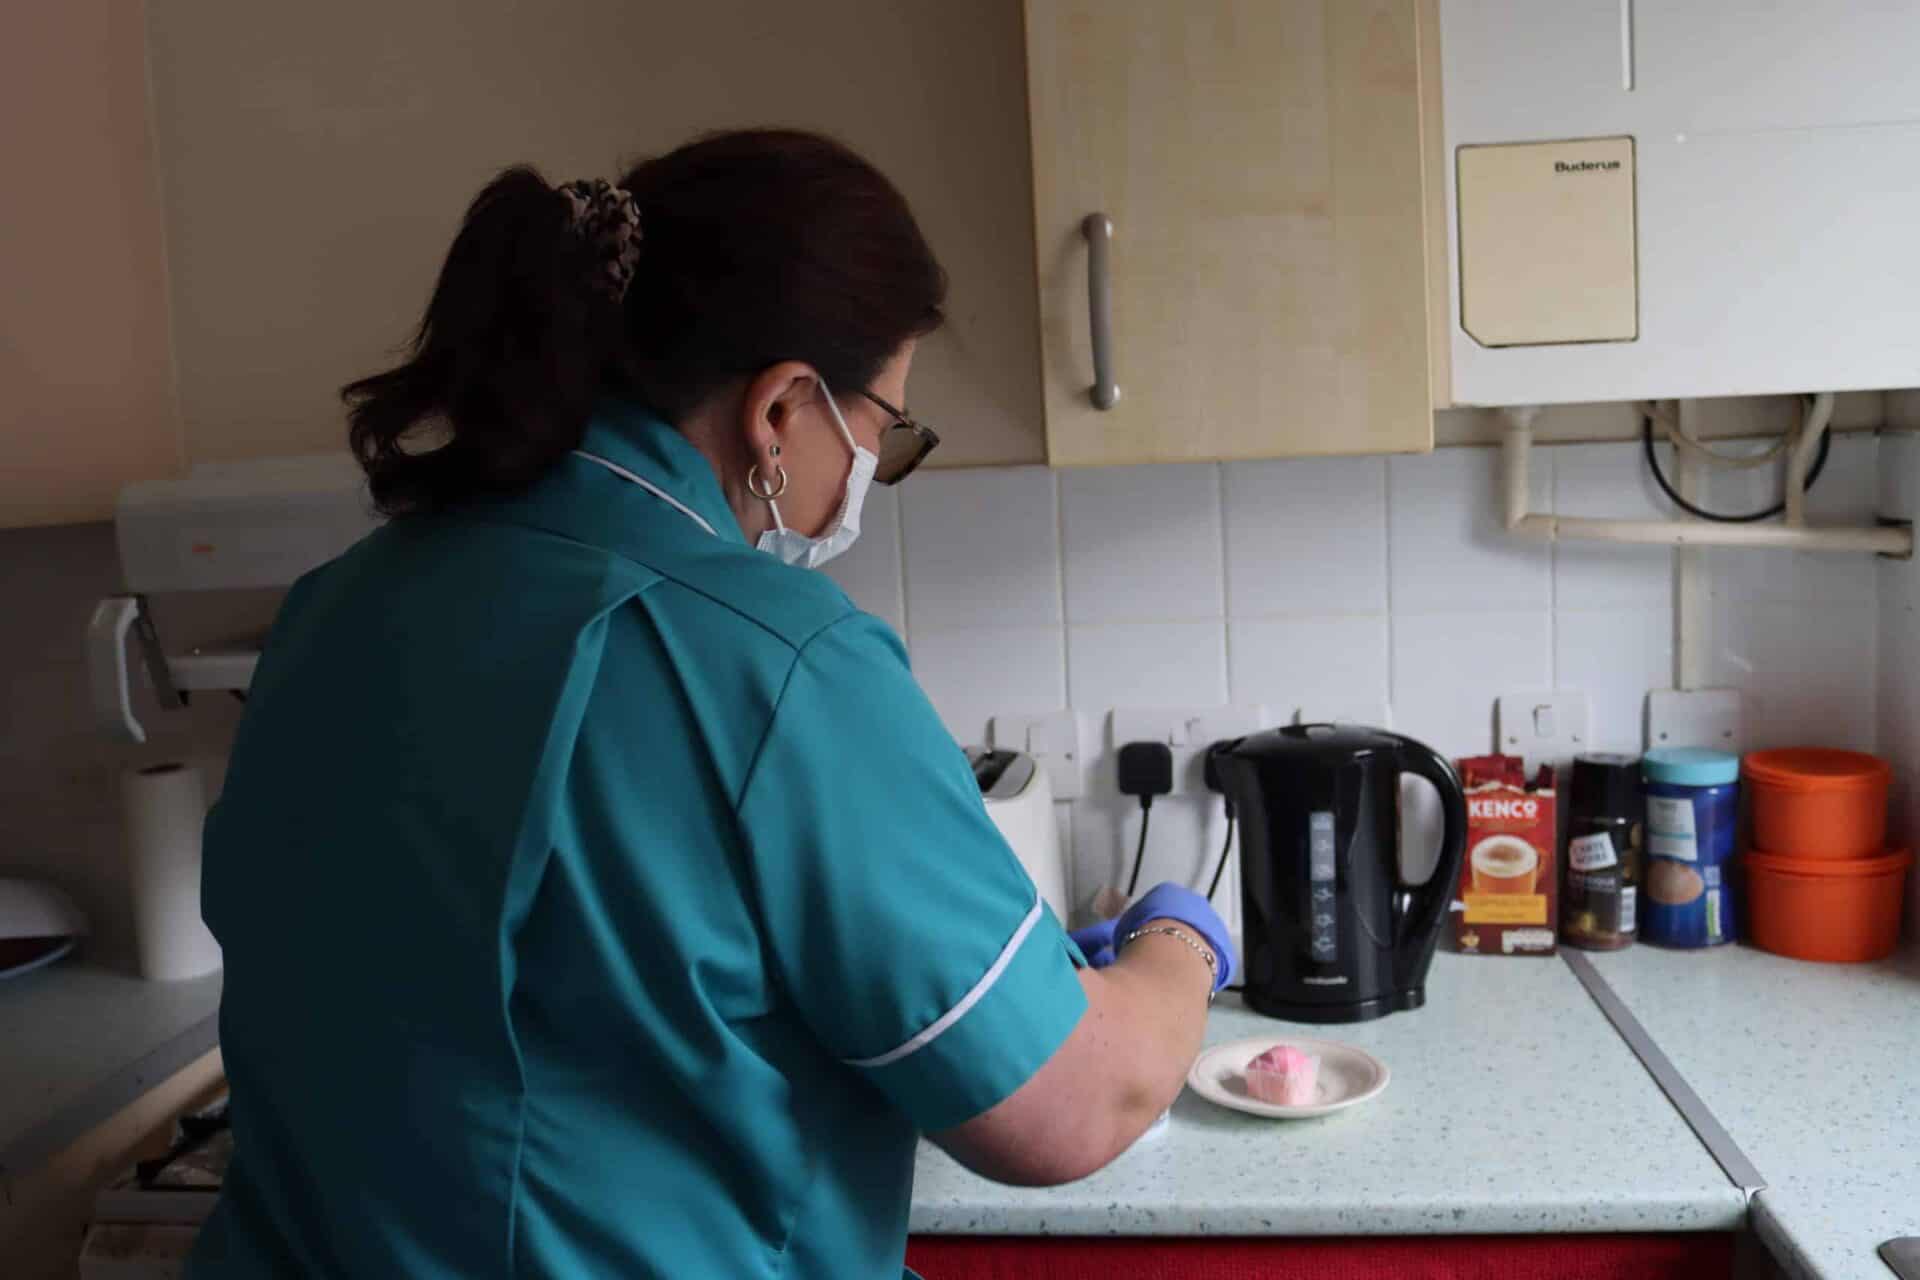 Healthcare professional in scrubs preparing a snack and beverage in a kitchen.